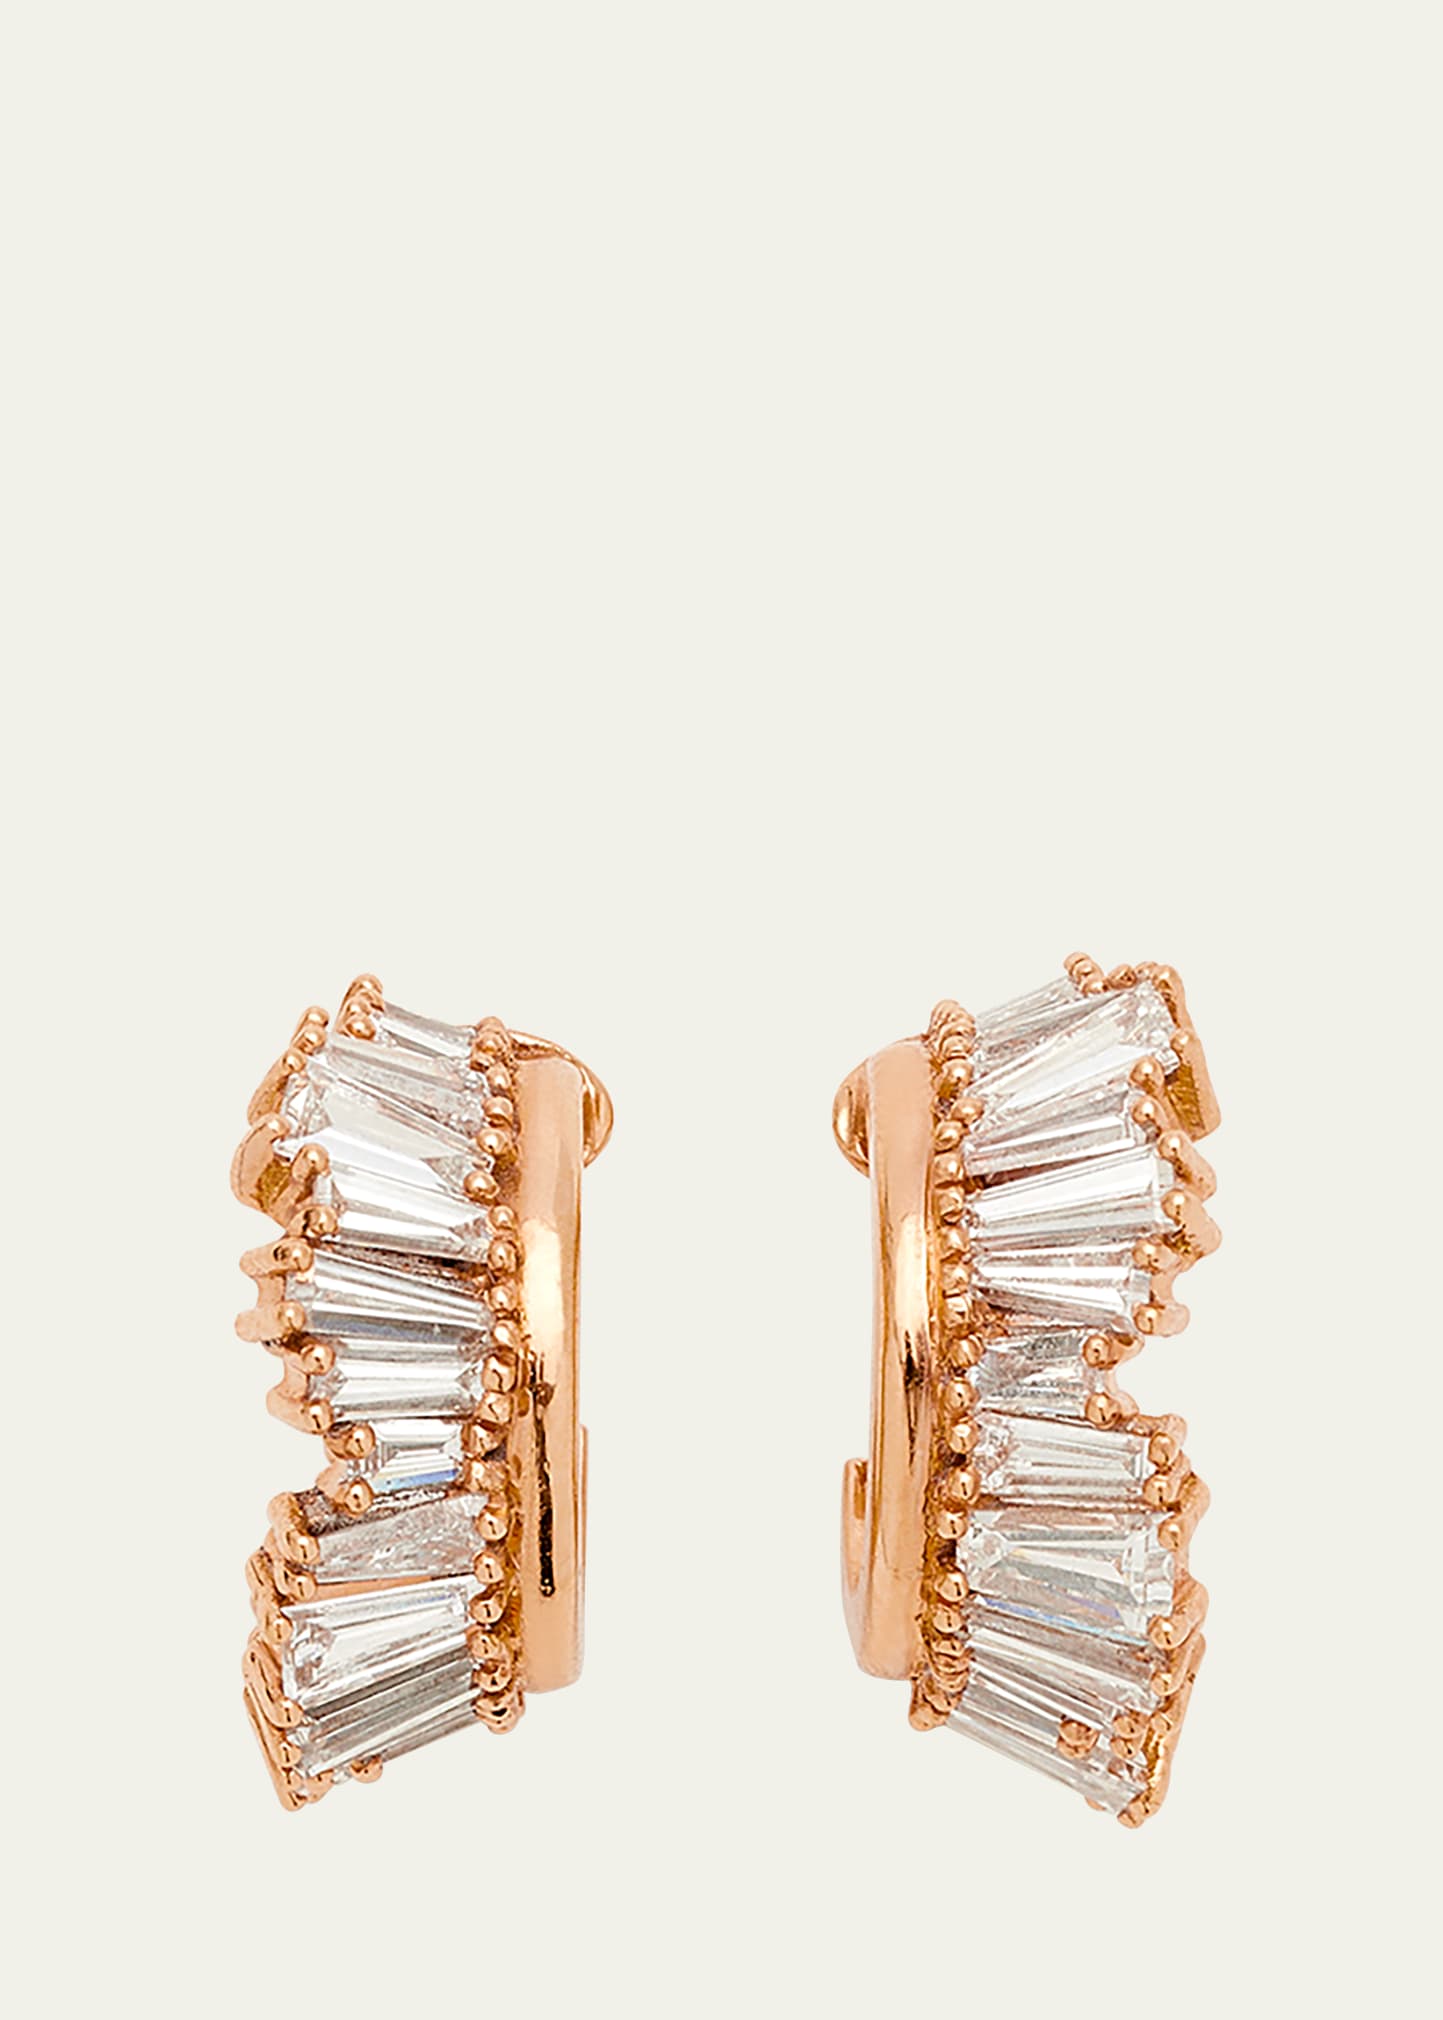 Petite Ruched Hoop Earrings with White Diamonds and Recycled Rose Gold